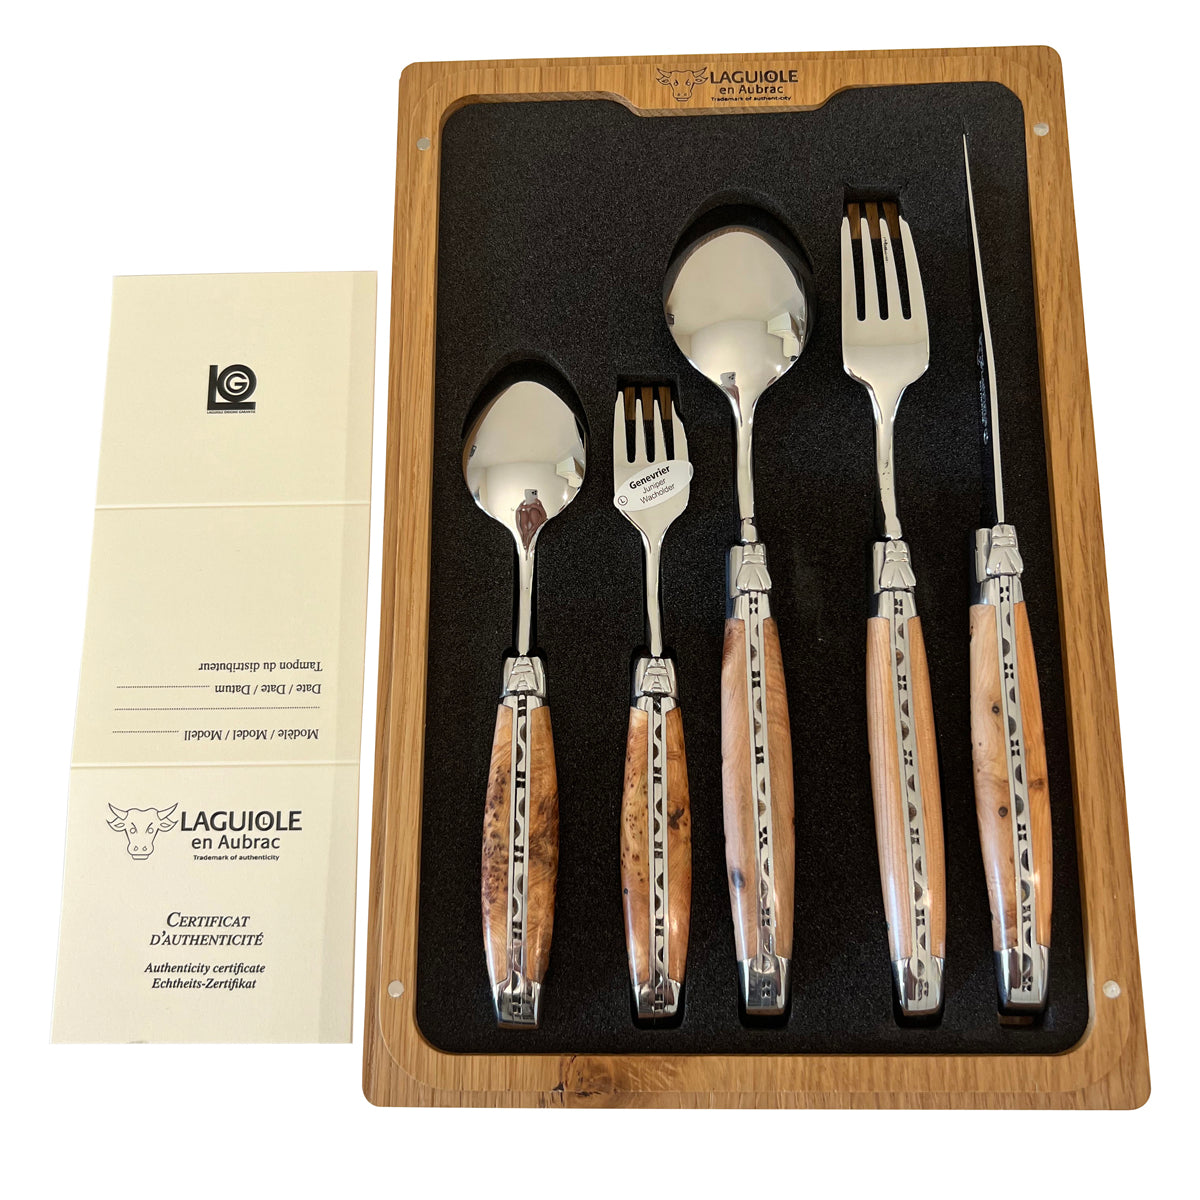 5-Piece Laguiole Flatware Set Olivewood handle made in France